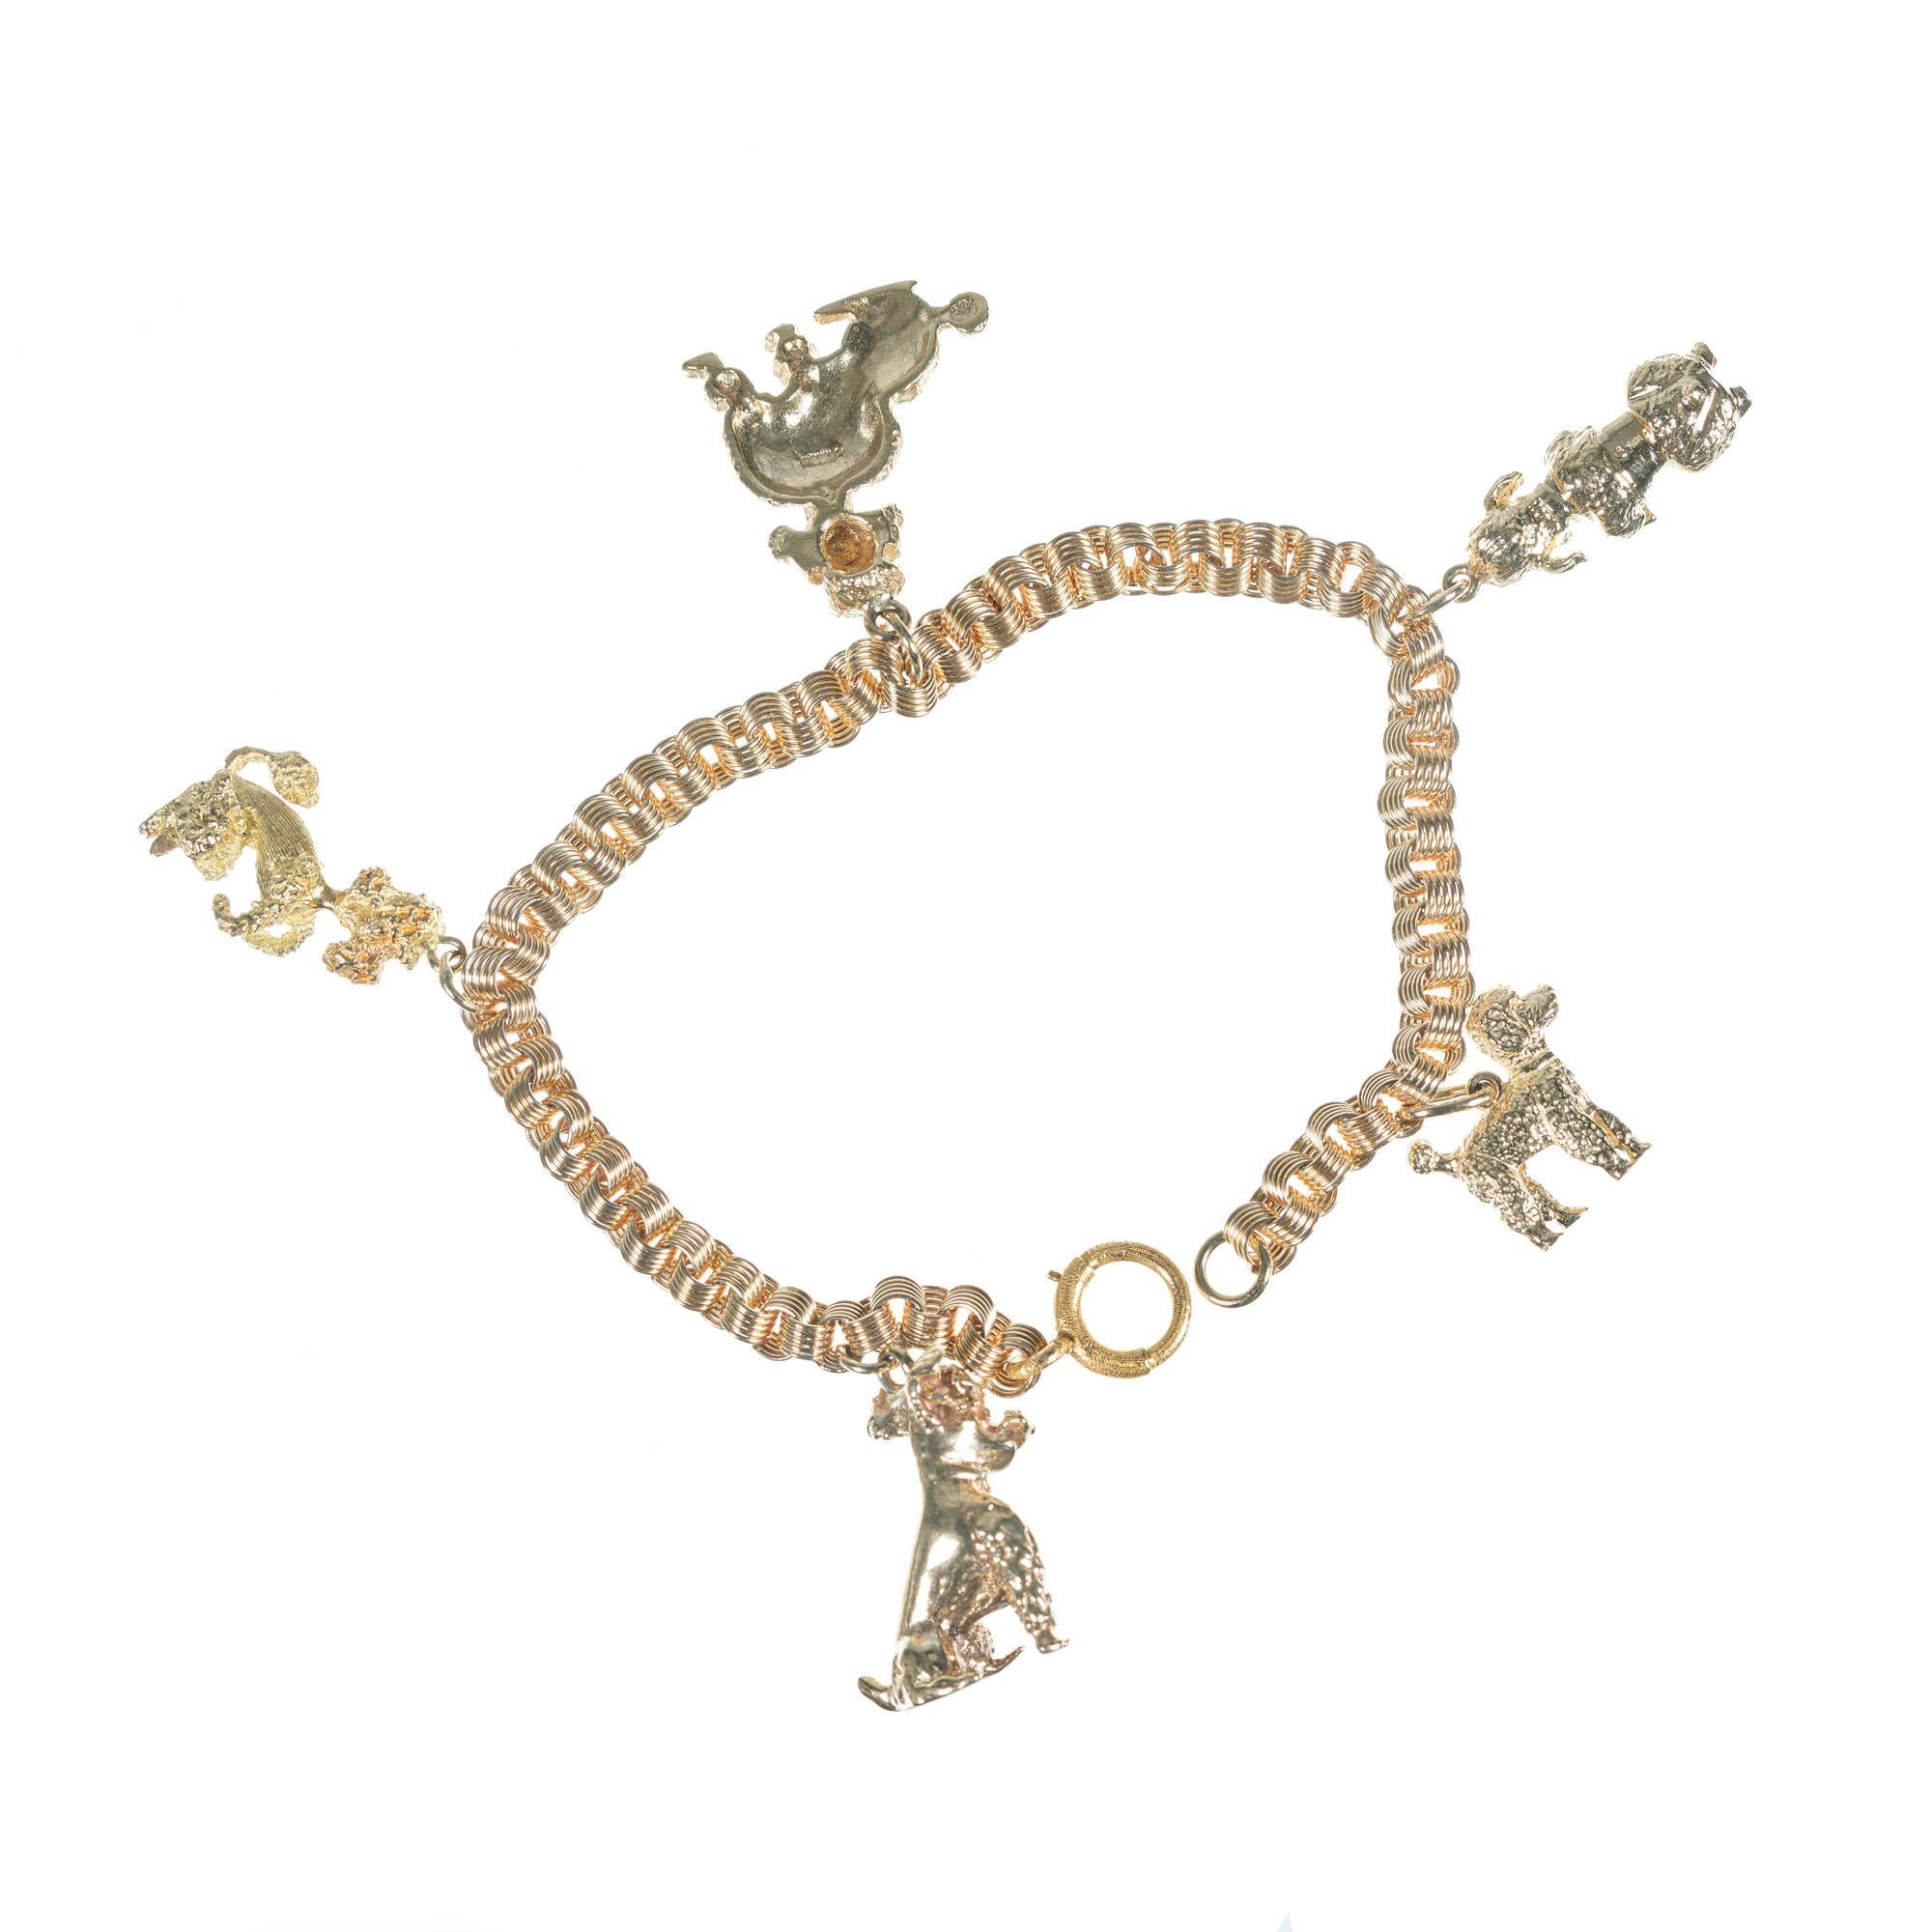 Vintage 1960's five poodle 14k yellow gold charm bracelet with four 3D and one 2D highly detailed different poodle charms. Triple spiral link bracelet with original textured spring ring. 7.5 inches.

14k yellow gold 
Stamped: 14k
33.4 grams
Length: